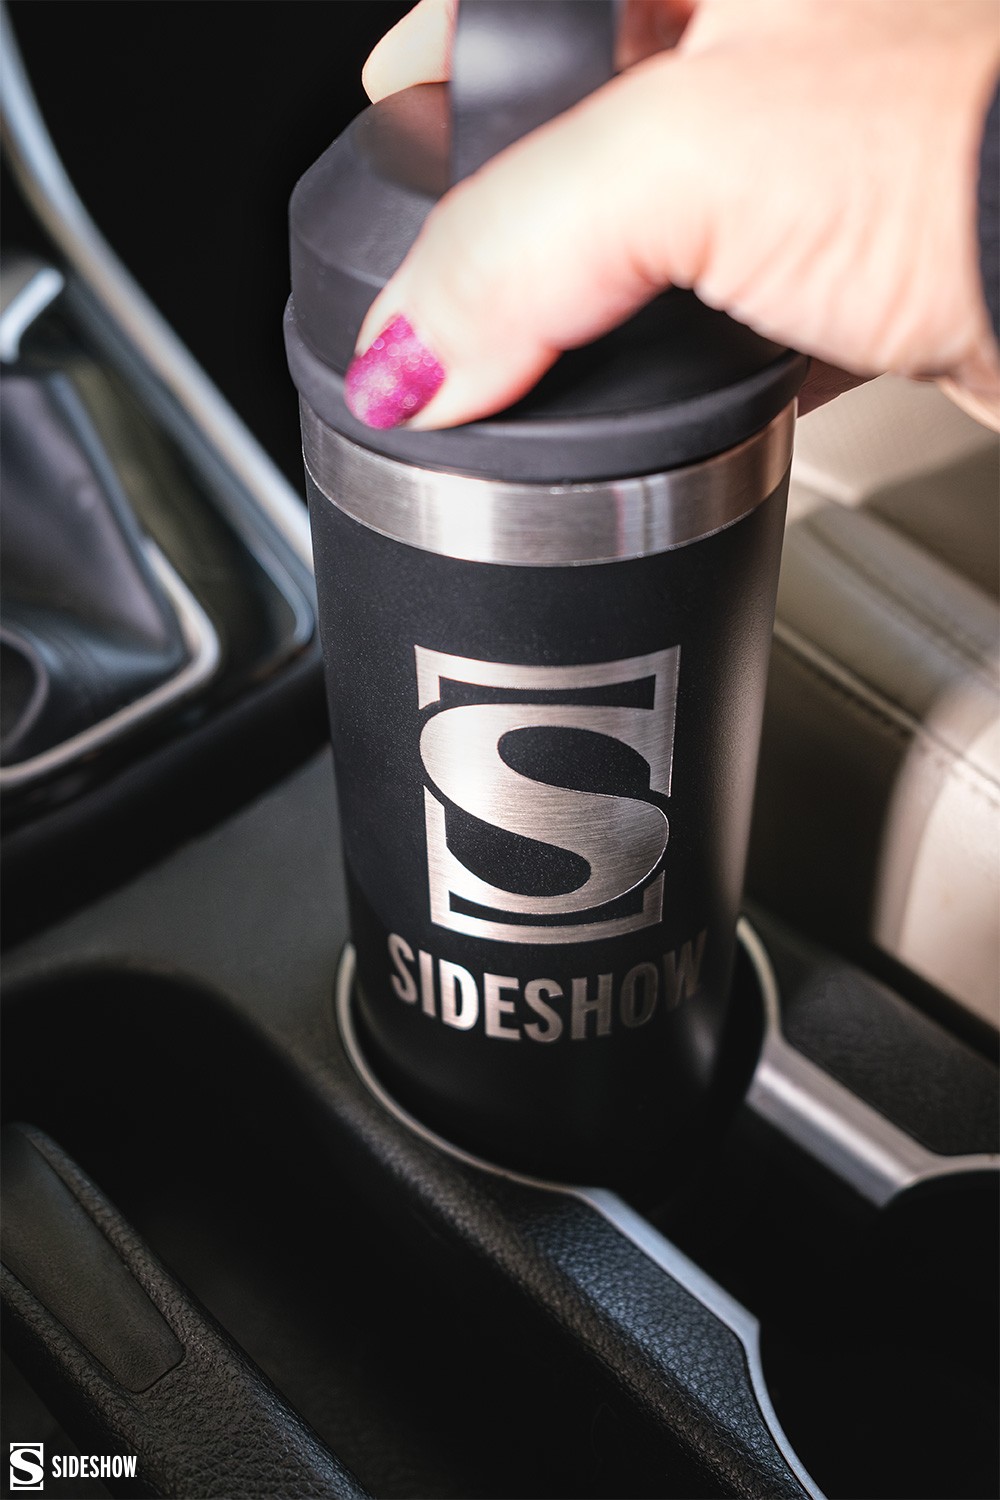 https://www.sideshow.com/cdn-cgi/image/quality=90,f=auto/https://www.sideshow.com/storage/product-images/502320/sideshow-x-yeti-water-bottle_sideshow-collectibles_gallery_6557a9fe54149.jpg